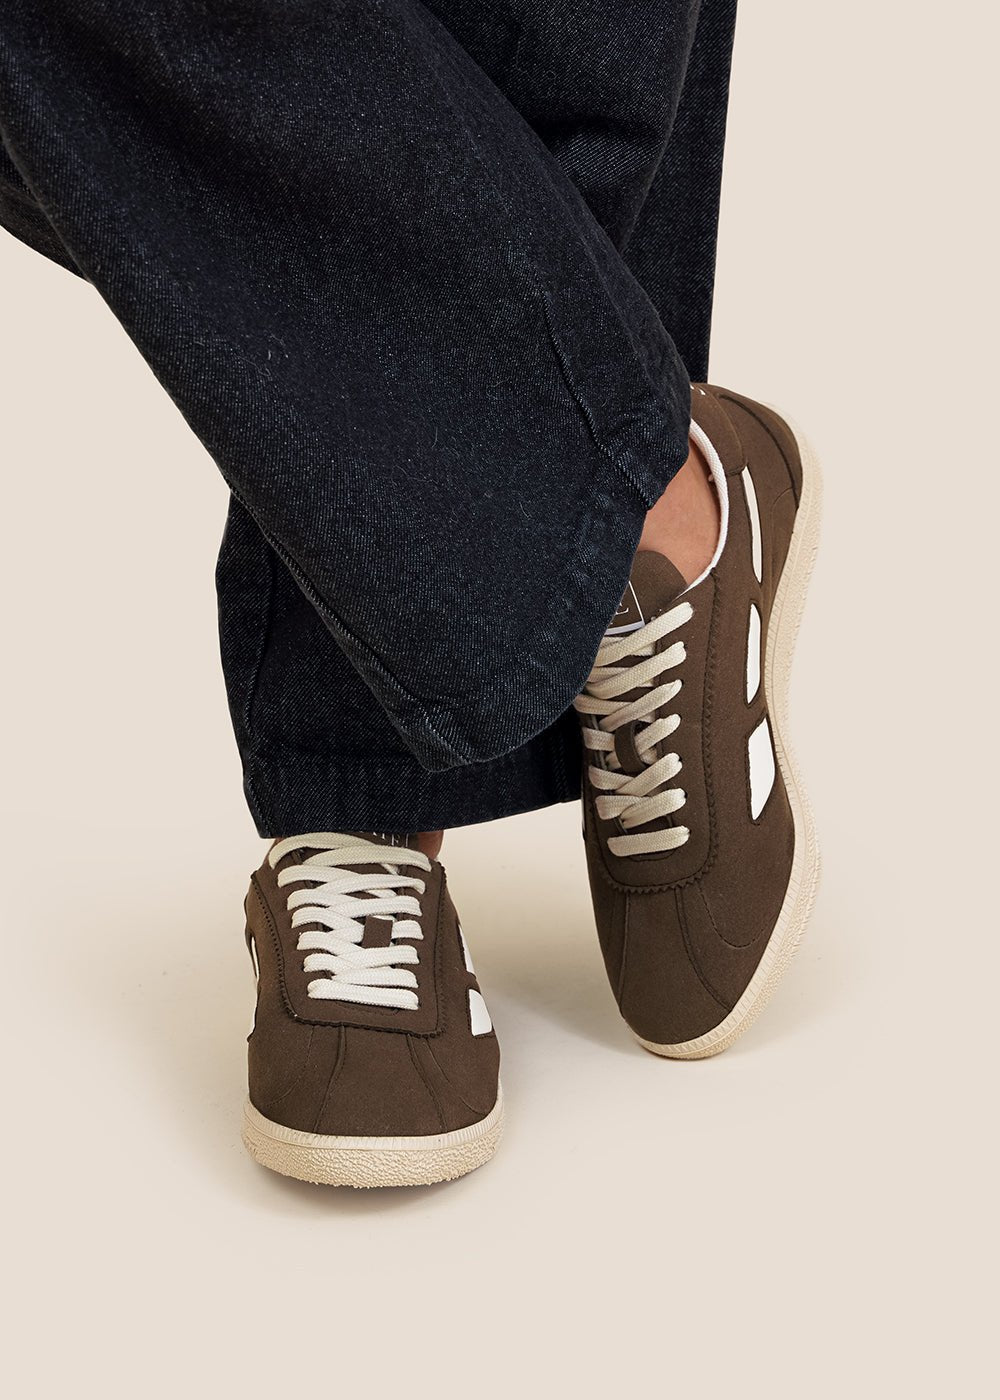 SAYE Olive Green Vegan Modelo '70 Sneakers - New Classics Studios Sustainable Ethical Fashion Canada